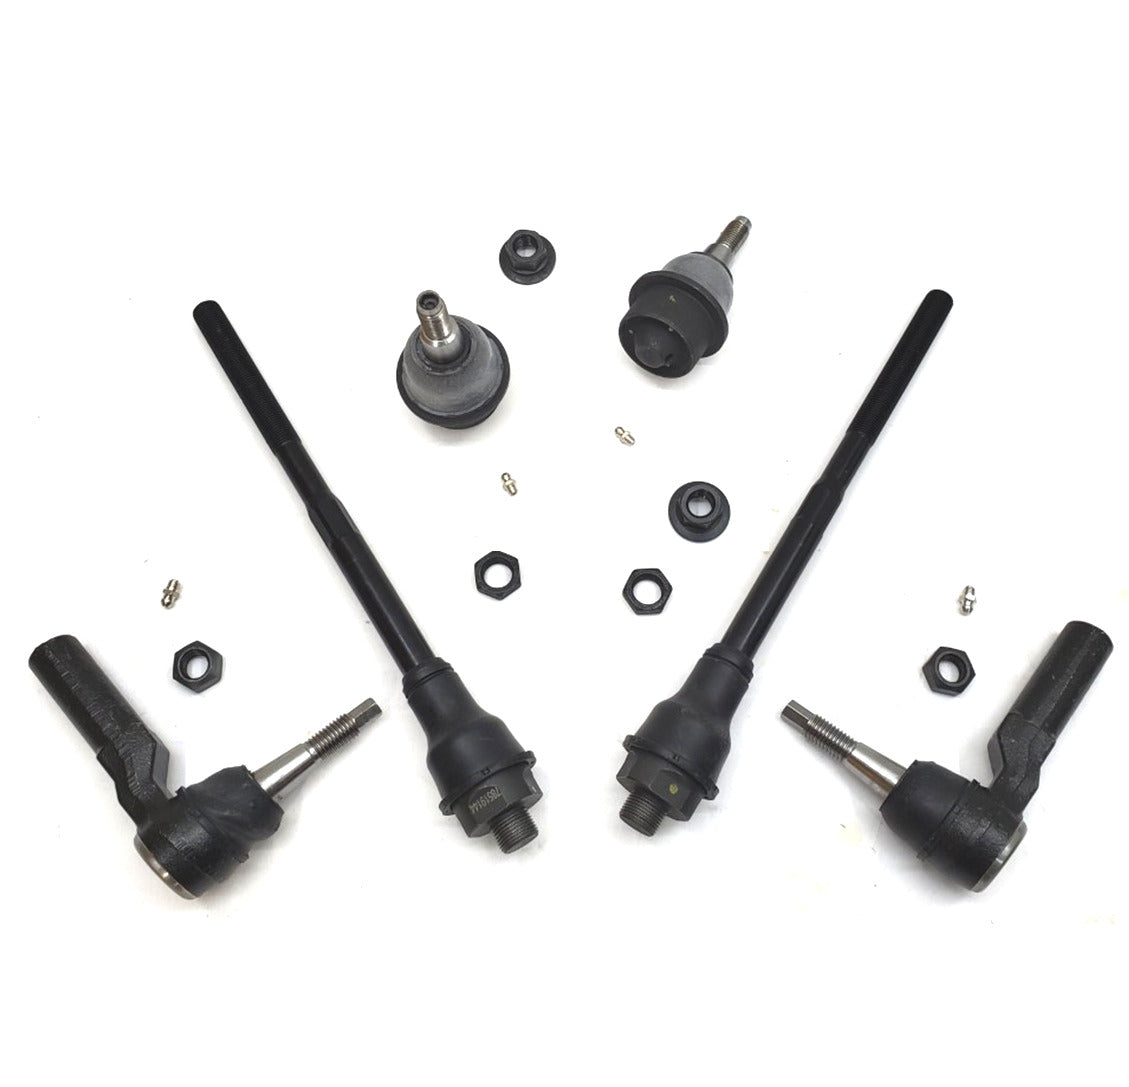 XRF Upper Ball Joints and Tie Rod Ends Steering Kit for 2011-2019 Chevrolet, GMC, 2500HD, 3500HD